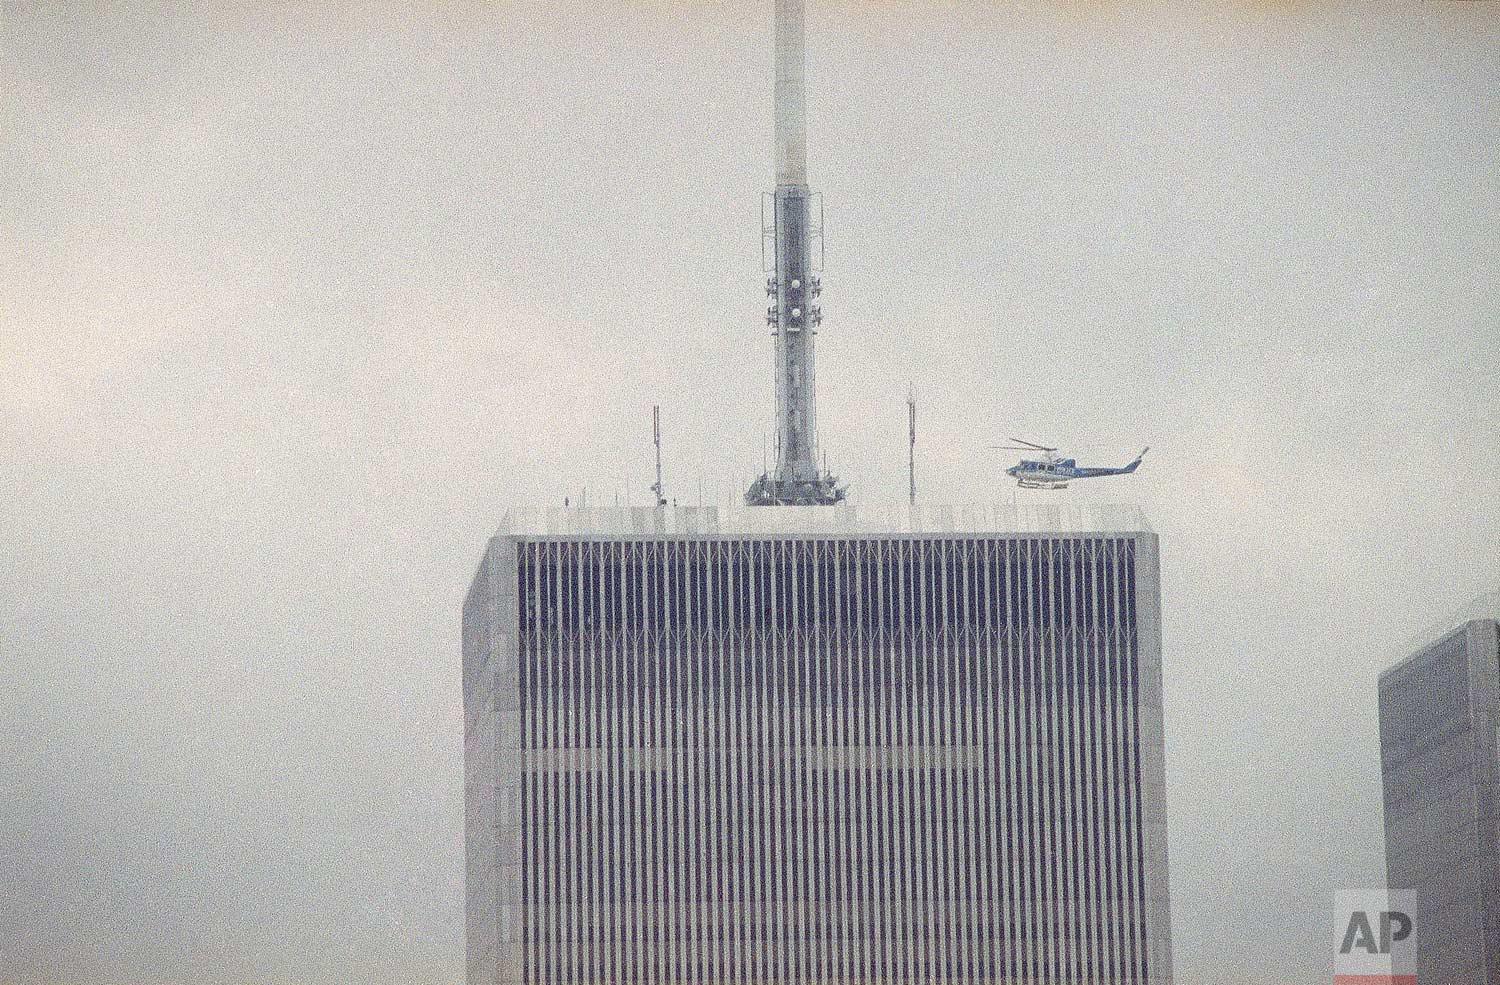 A NYPD helicopter readies to land atop the North Tower of the World Trade Center in New York to evacuate survivors stranded there, after a terrorist bomb explosion in an underground parking garage at the facility (February 26, 1993)